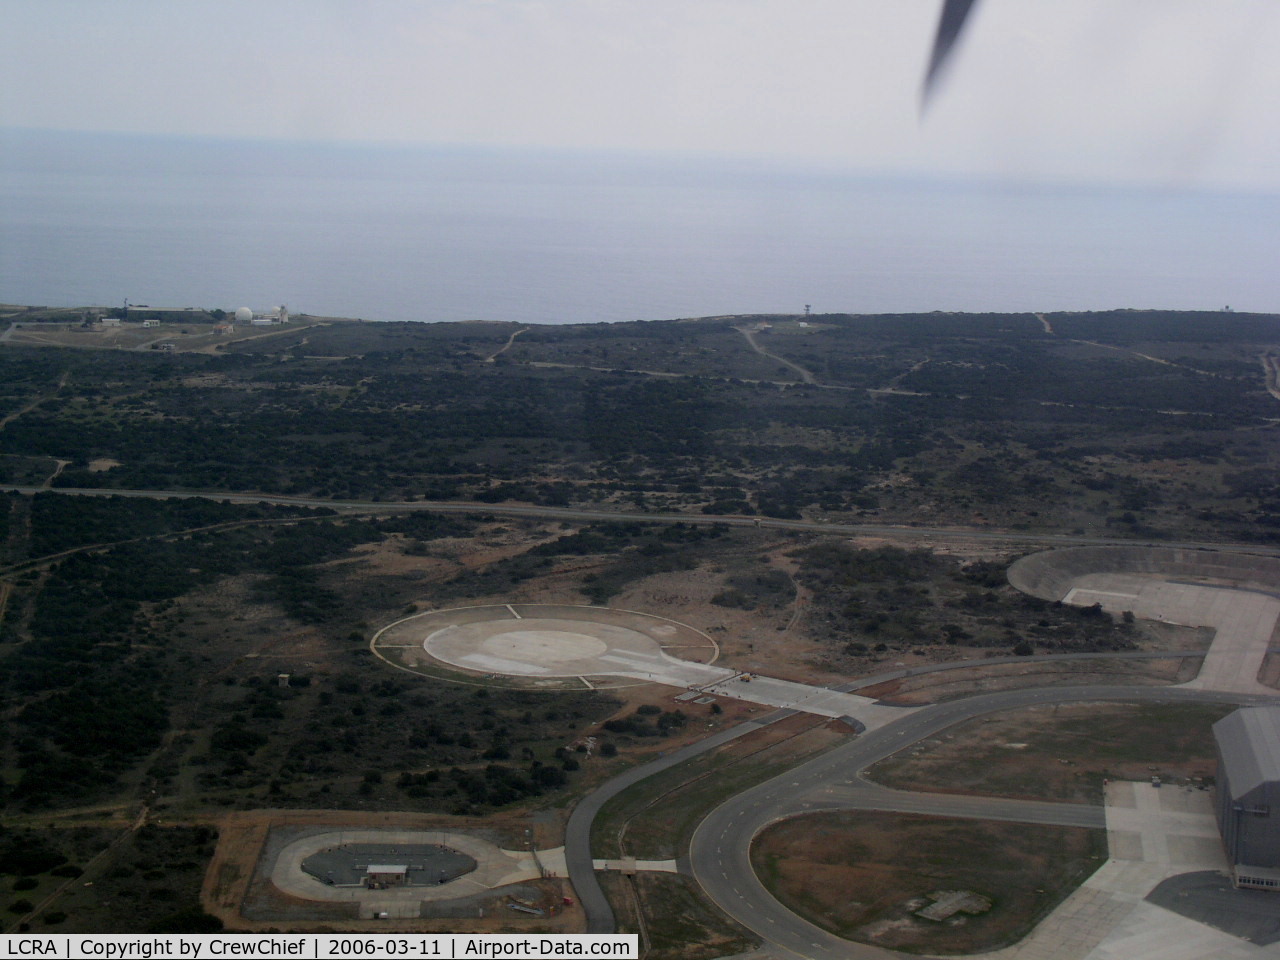 RAF Akrotiri Airport, Akrotiri Cyprus (LCRA) - Taxiways and runup areas from the air